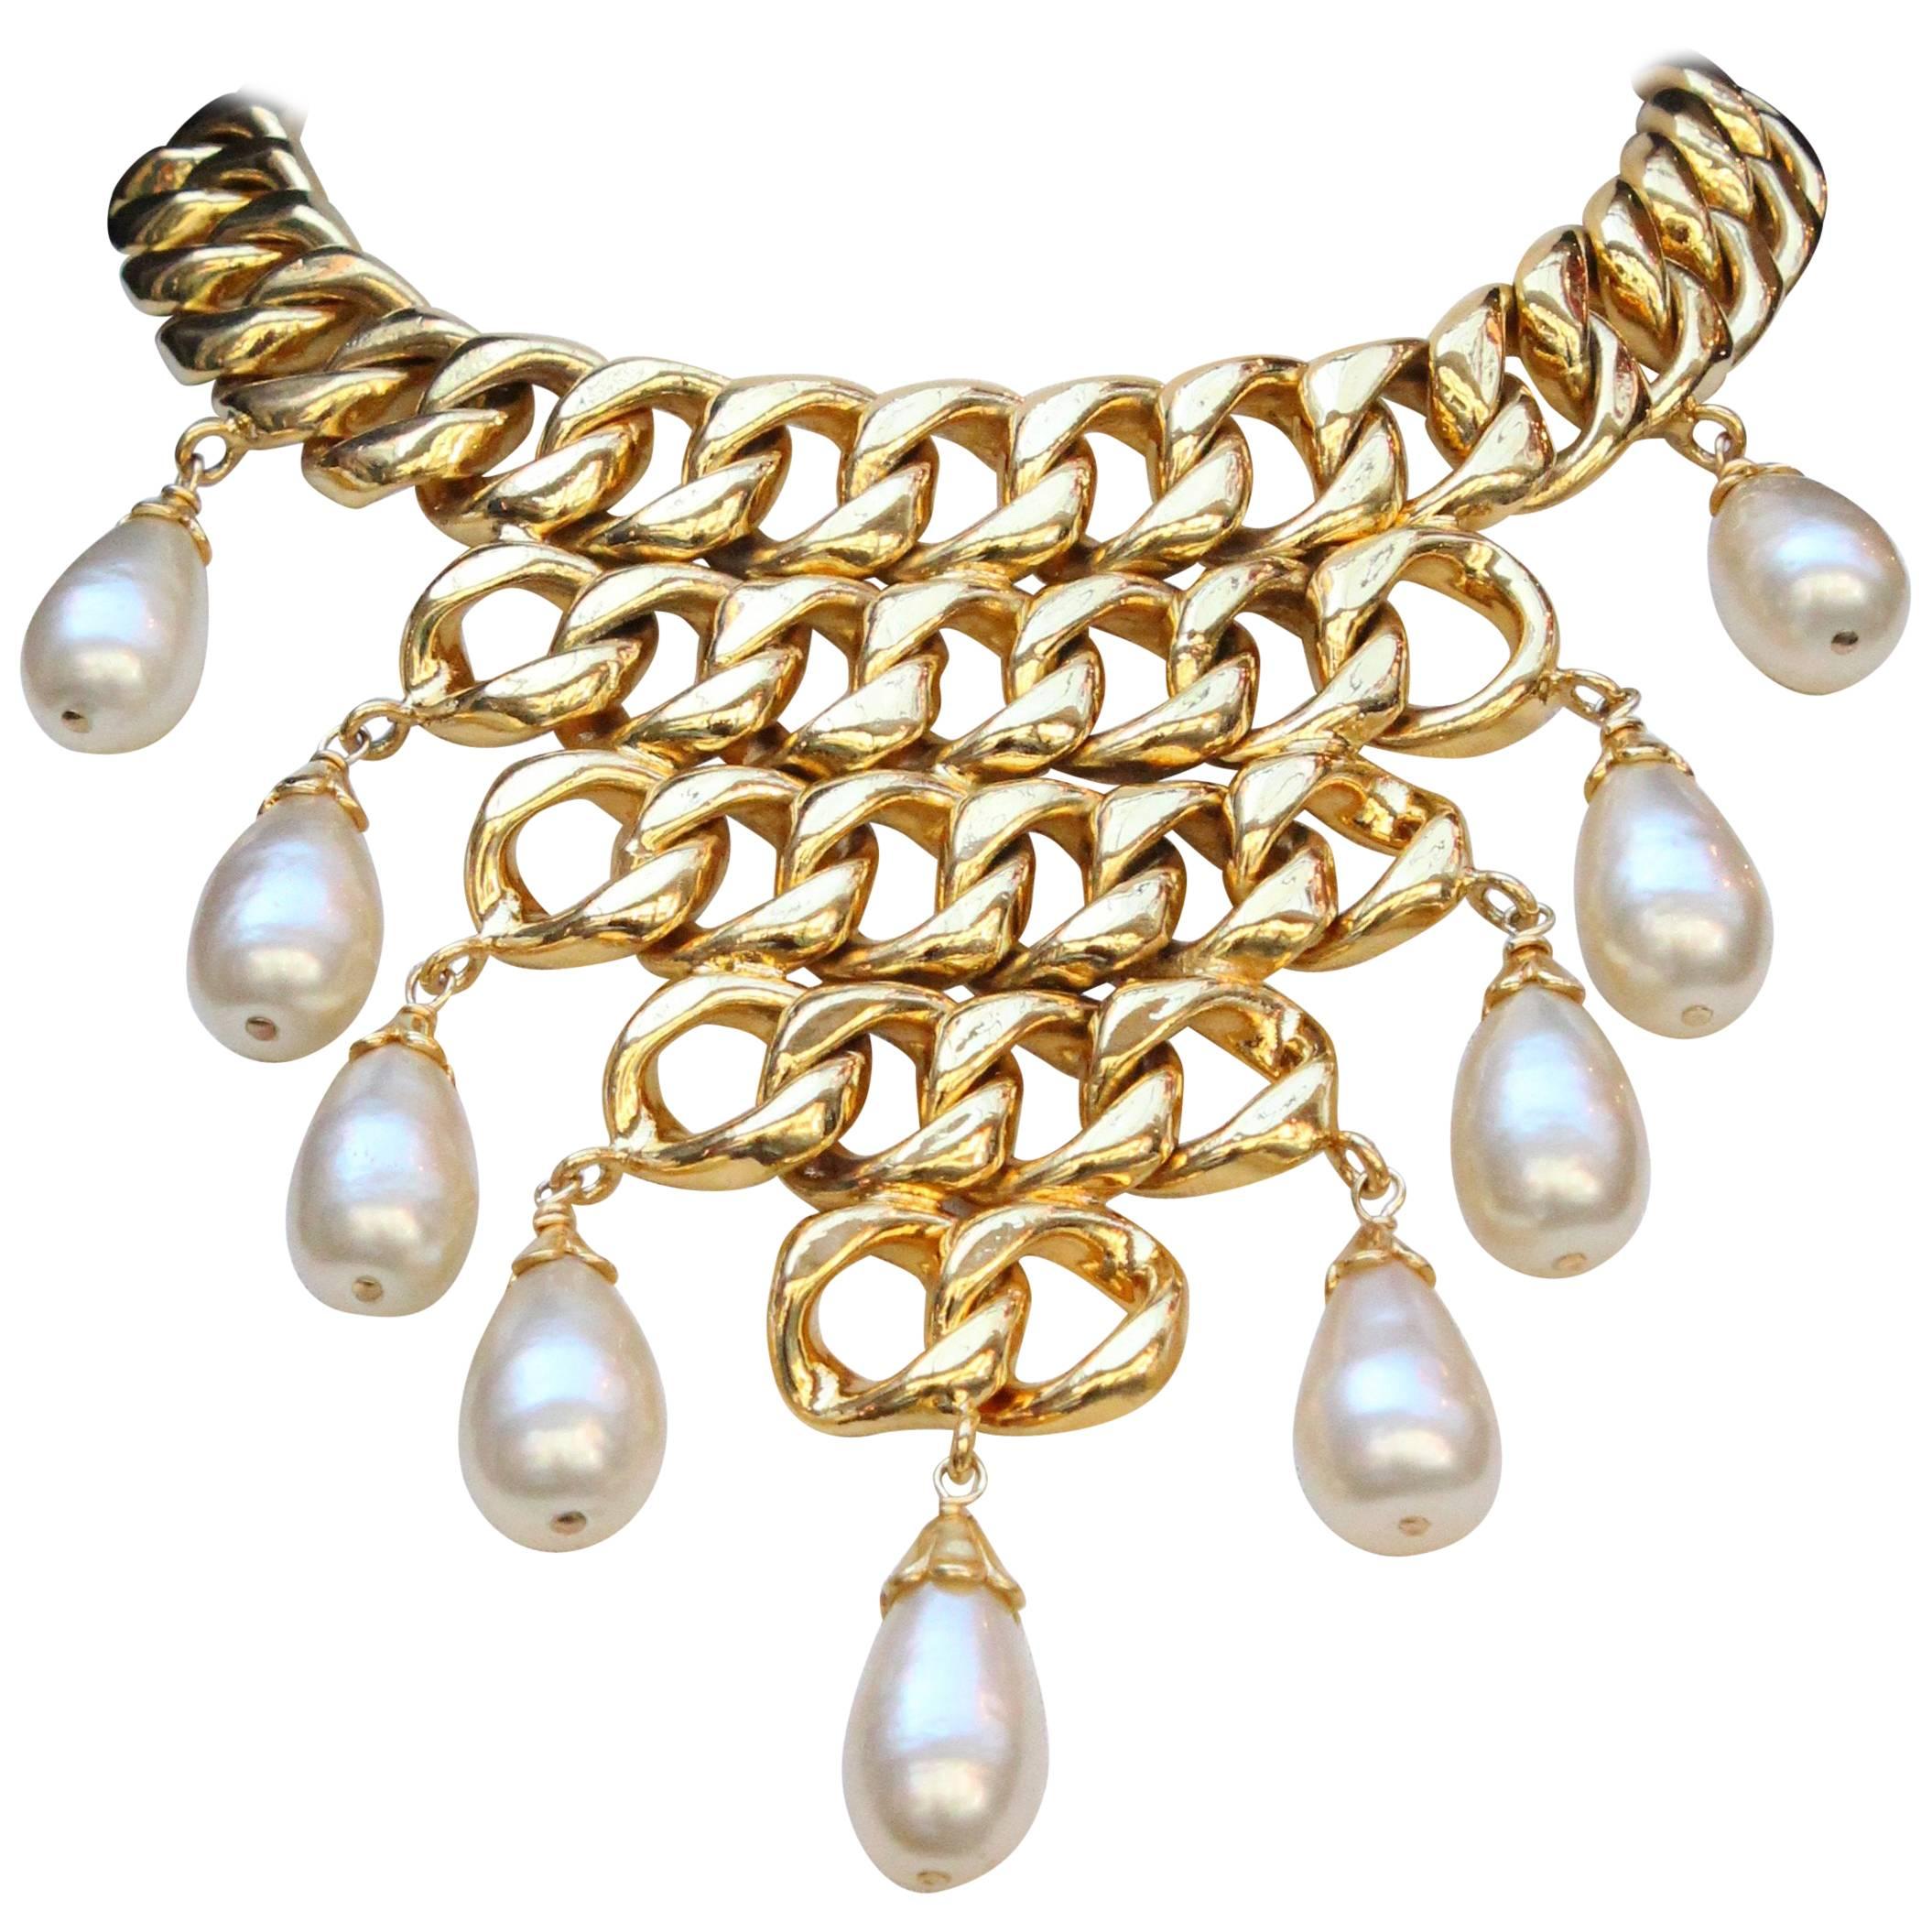 Chanel iconic necklace composed of gilded metal and pearly tear-drops